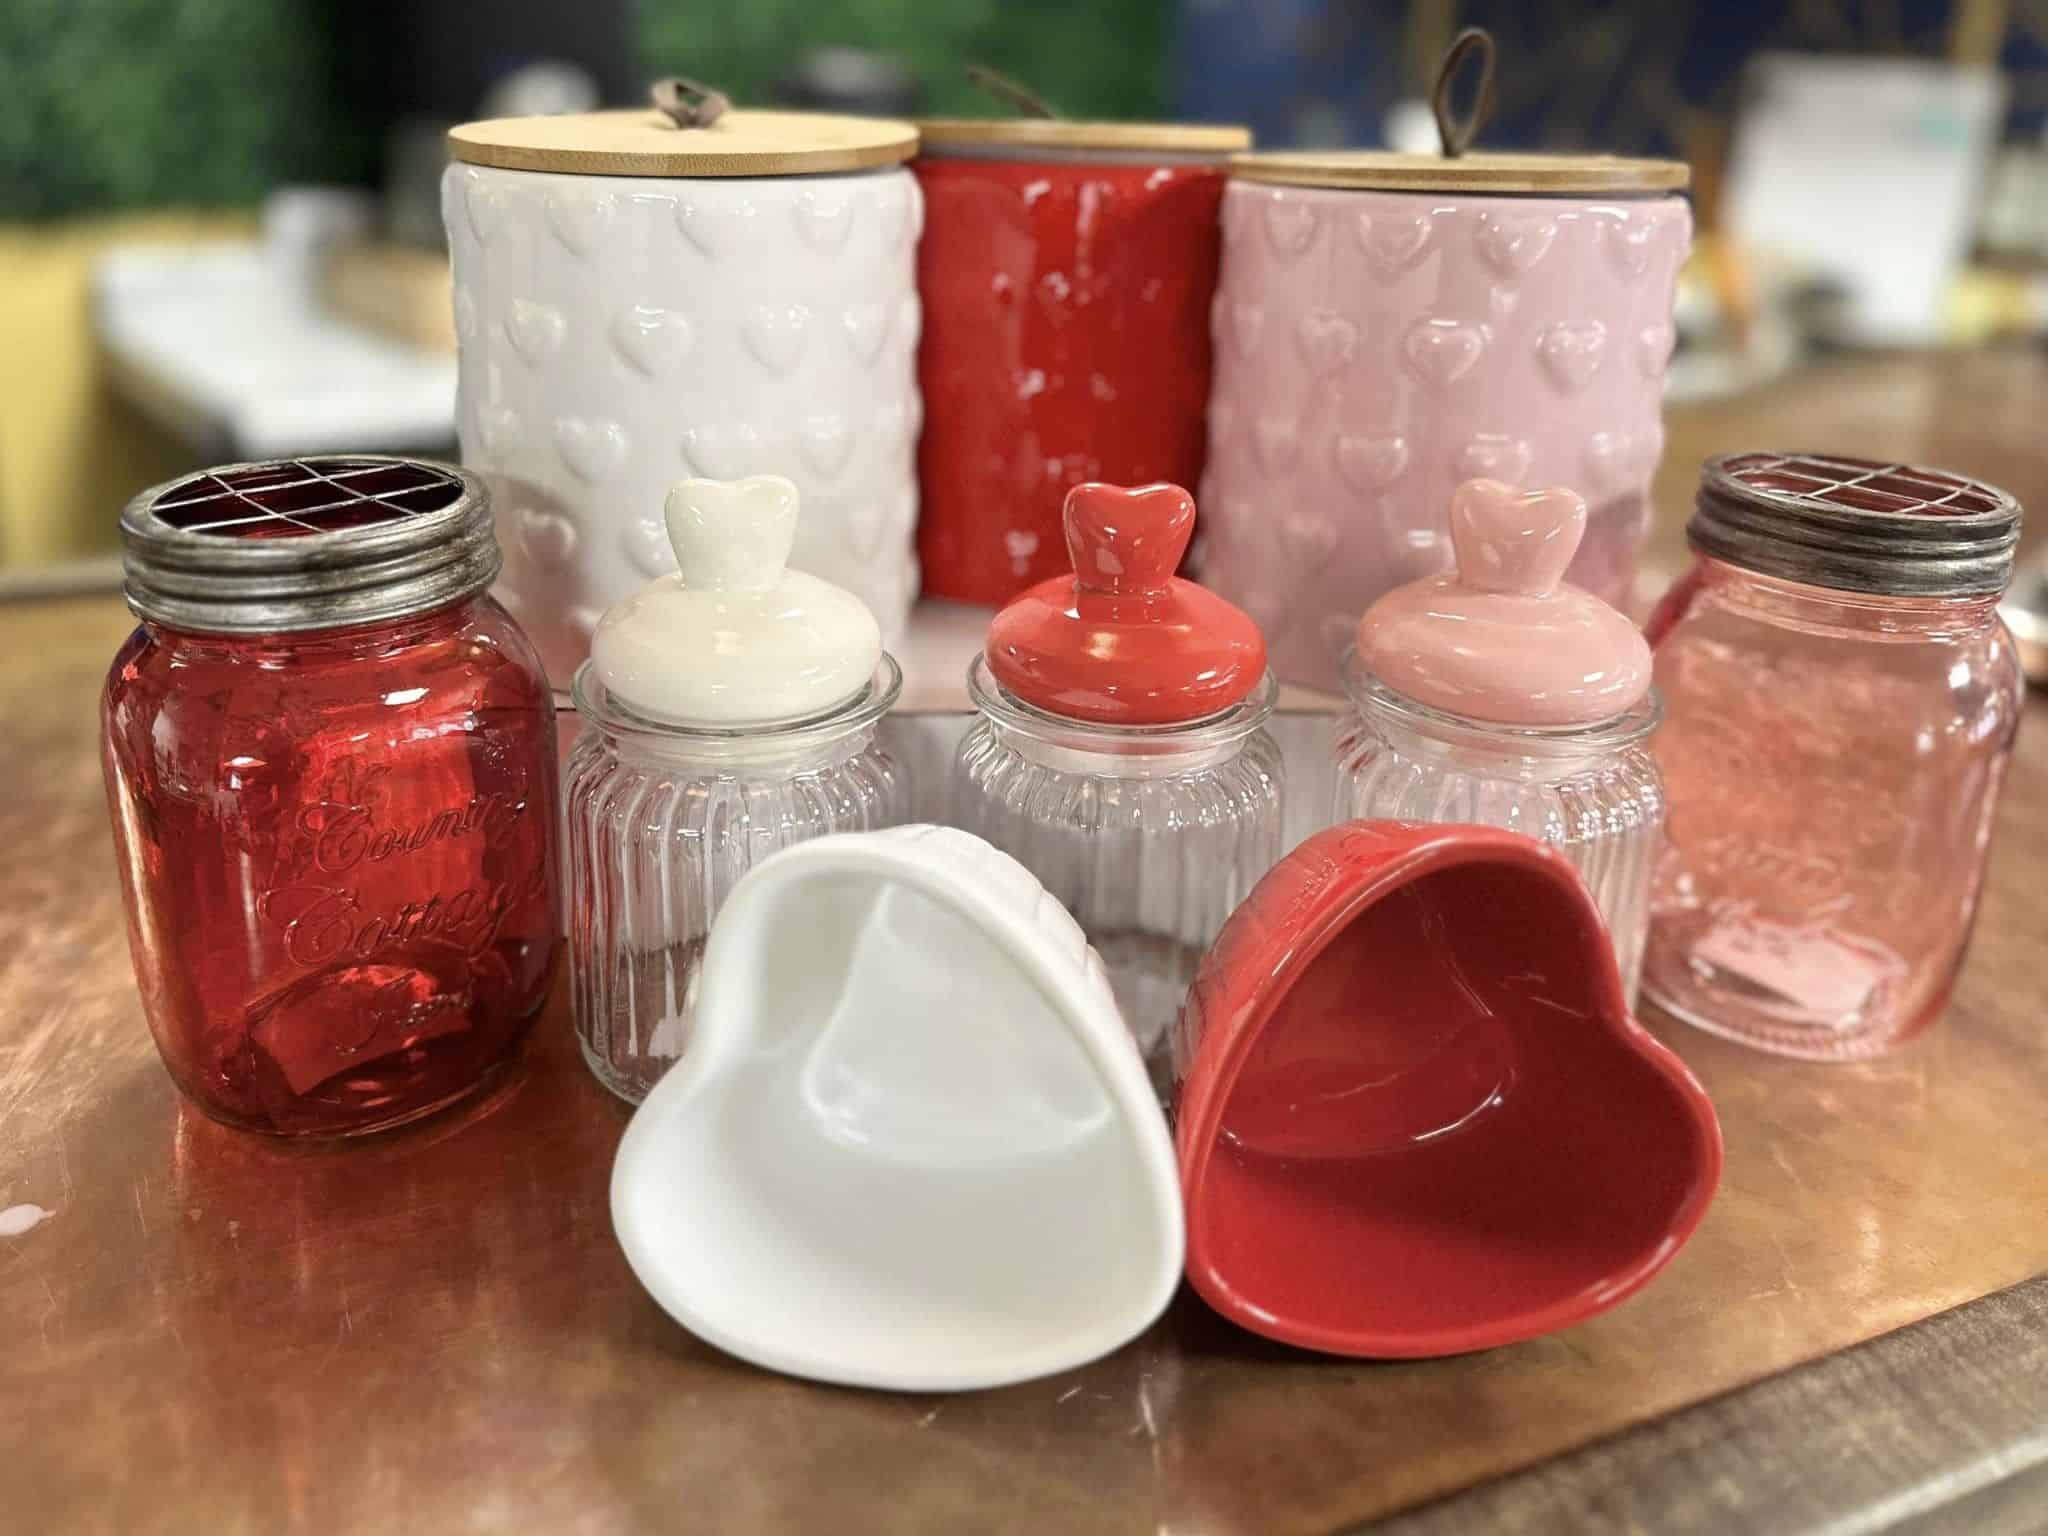 Red, pink, and white Valintine containers.